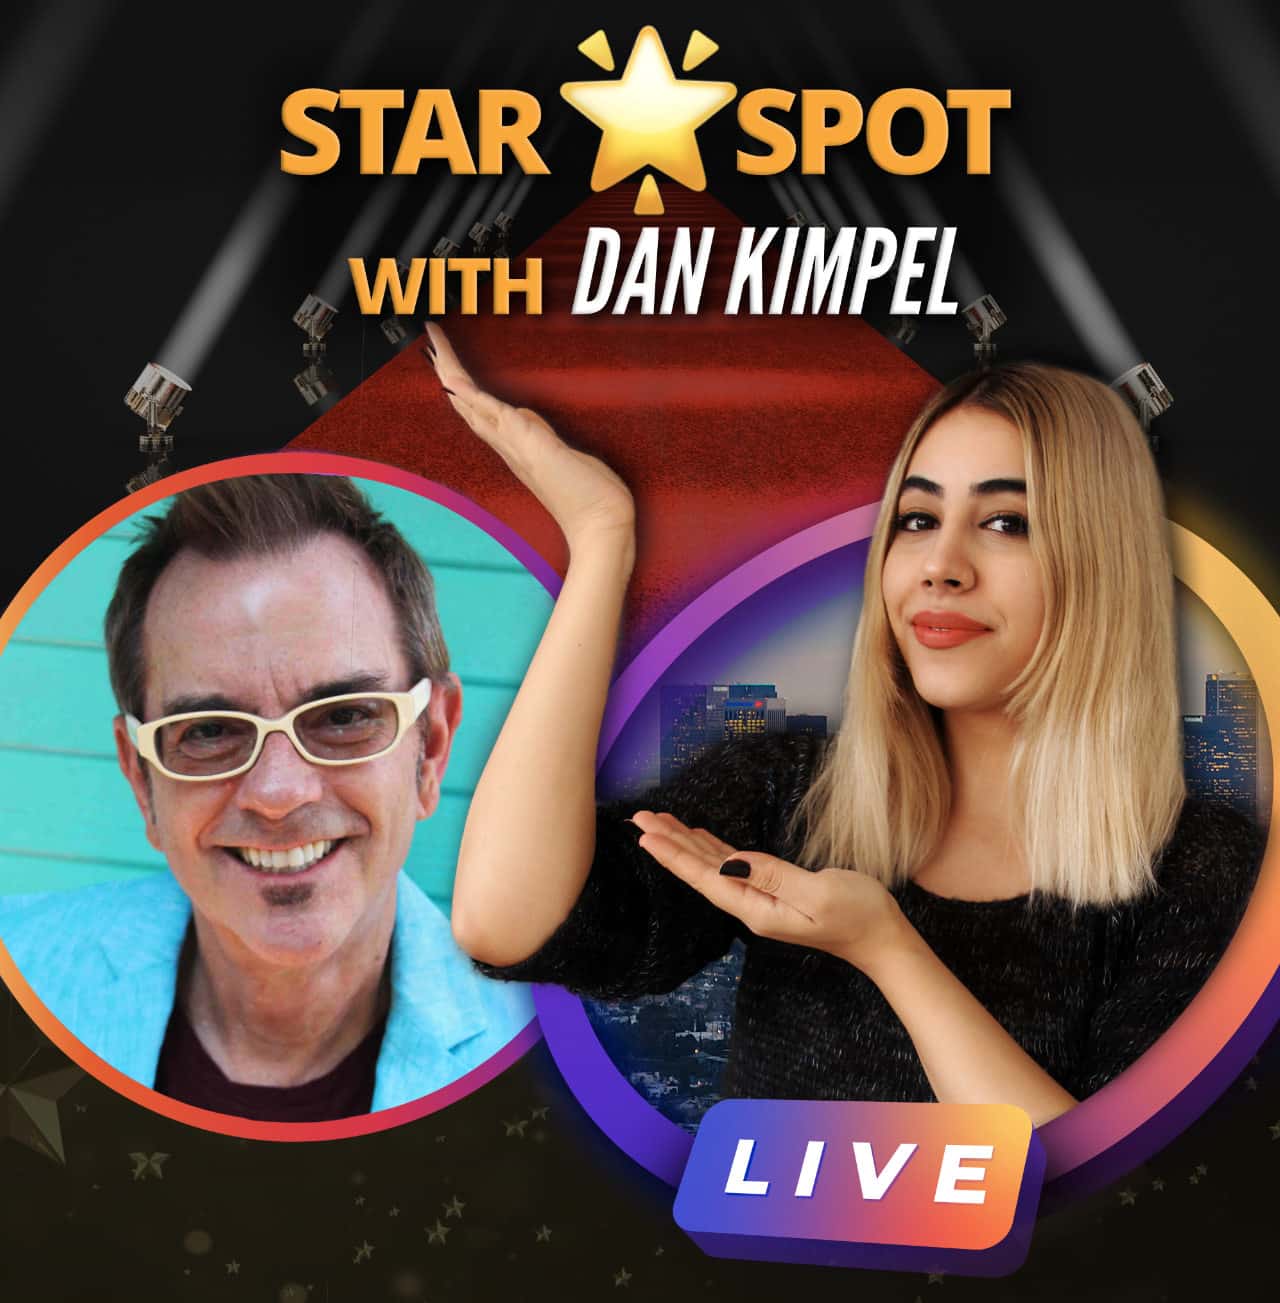 Promotional cover art of Star Spot with Dan Kimpel